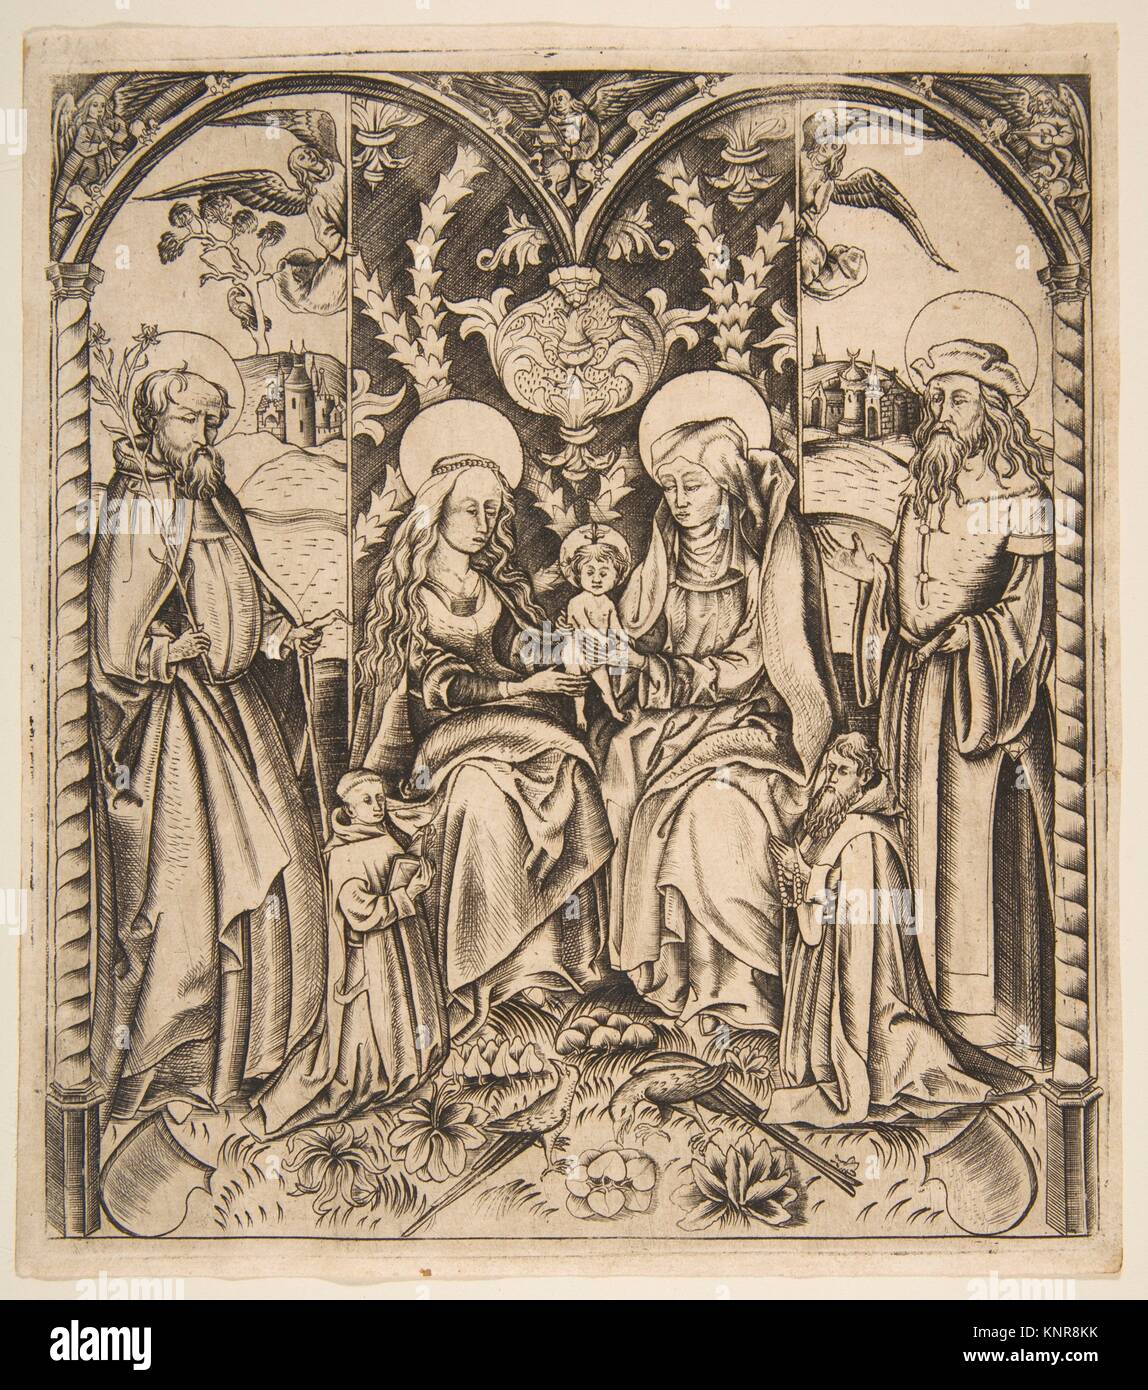 The Holy Family. Artist: Anonymous, German, 15th century; Date: 15th century; Medium: Engraving; first state; Dimensions: sheet: 7 5/16 x 6 9/16 in. Stock Photo